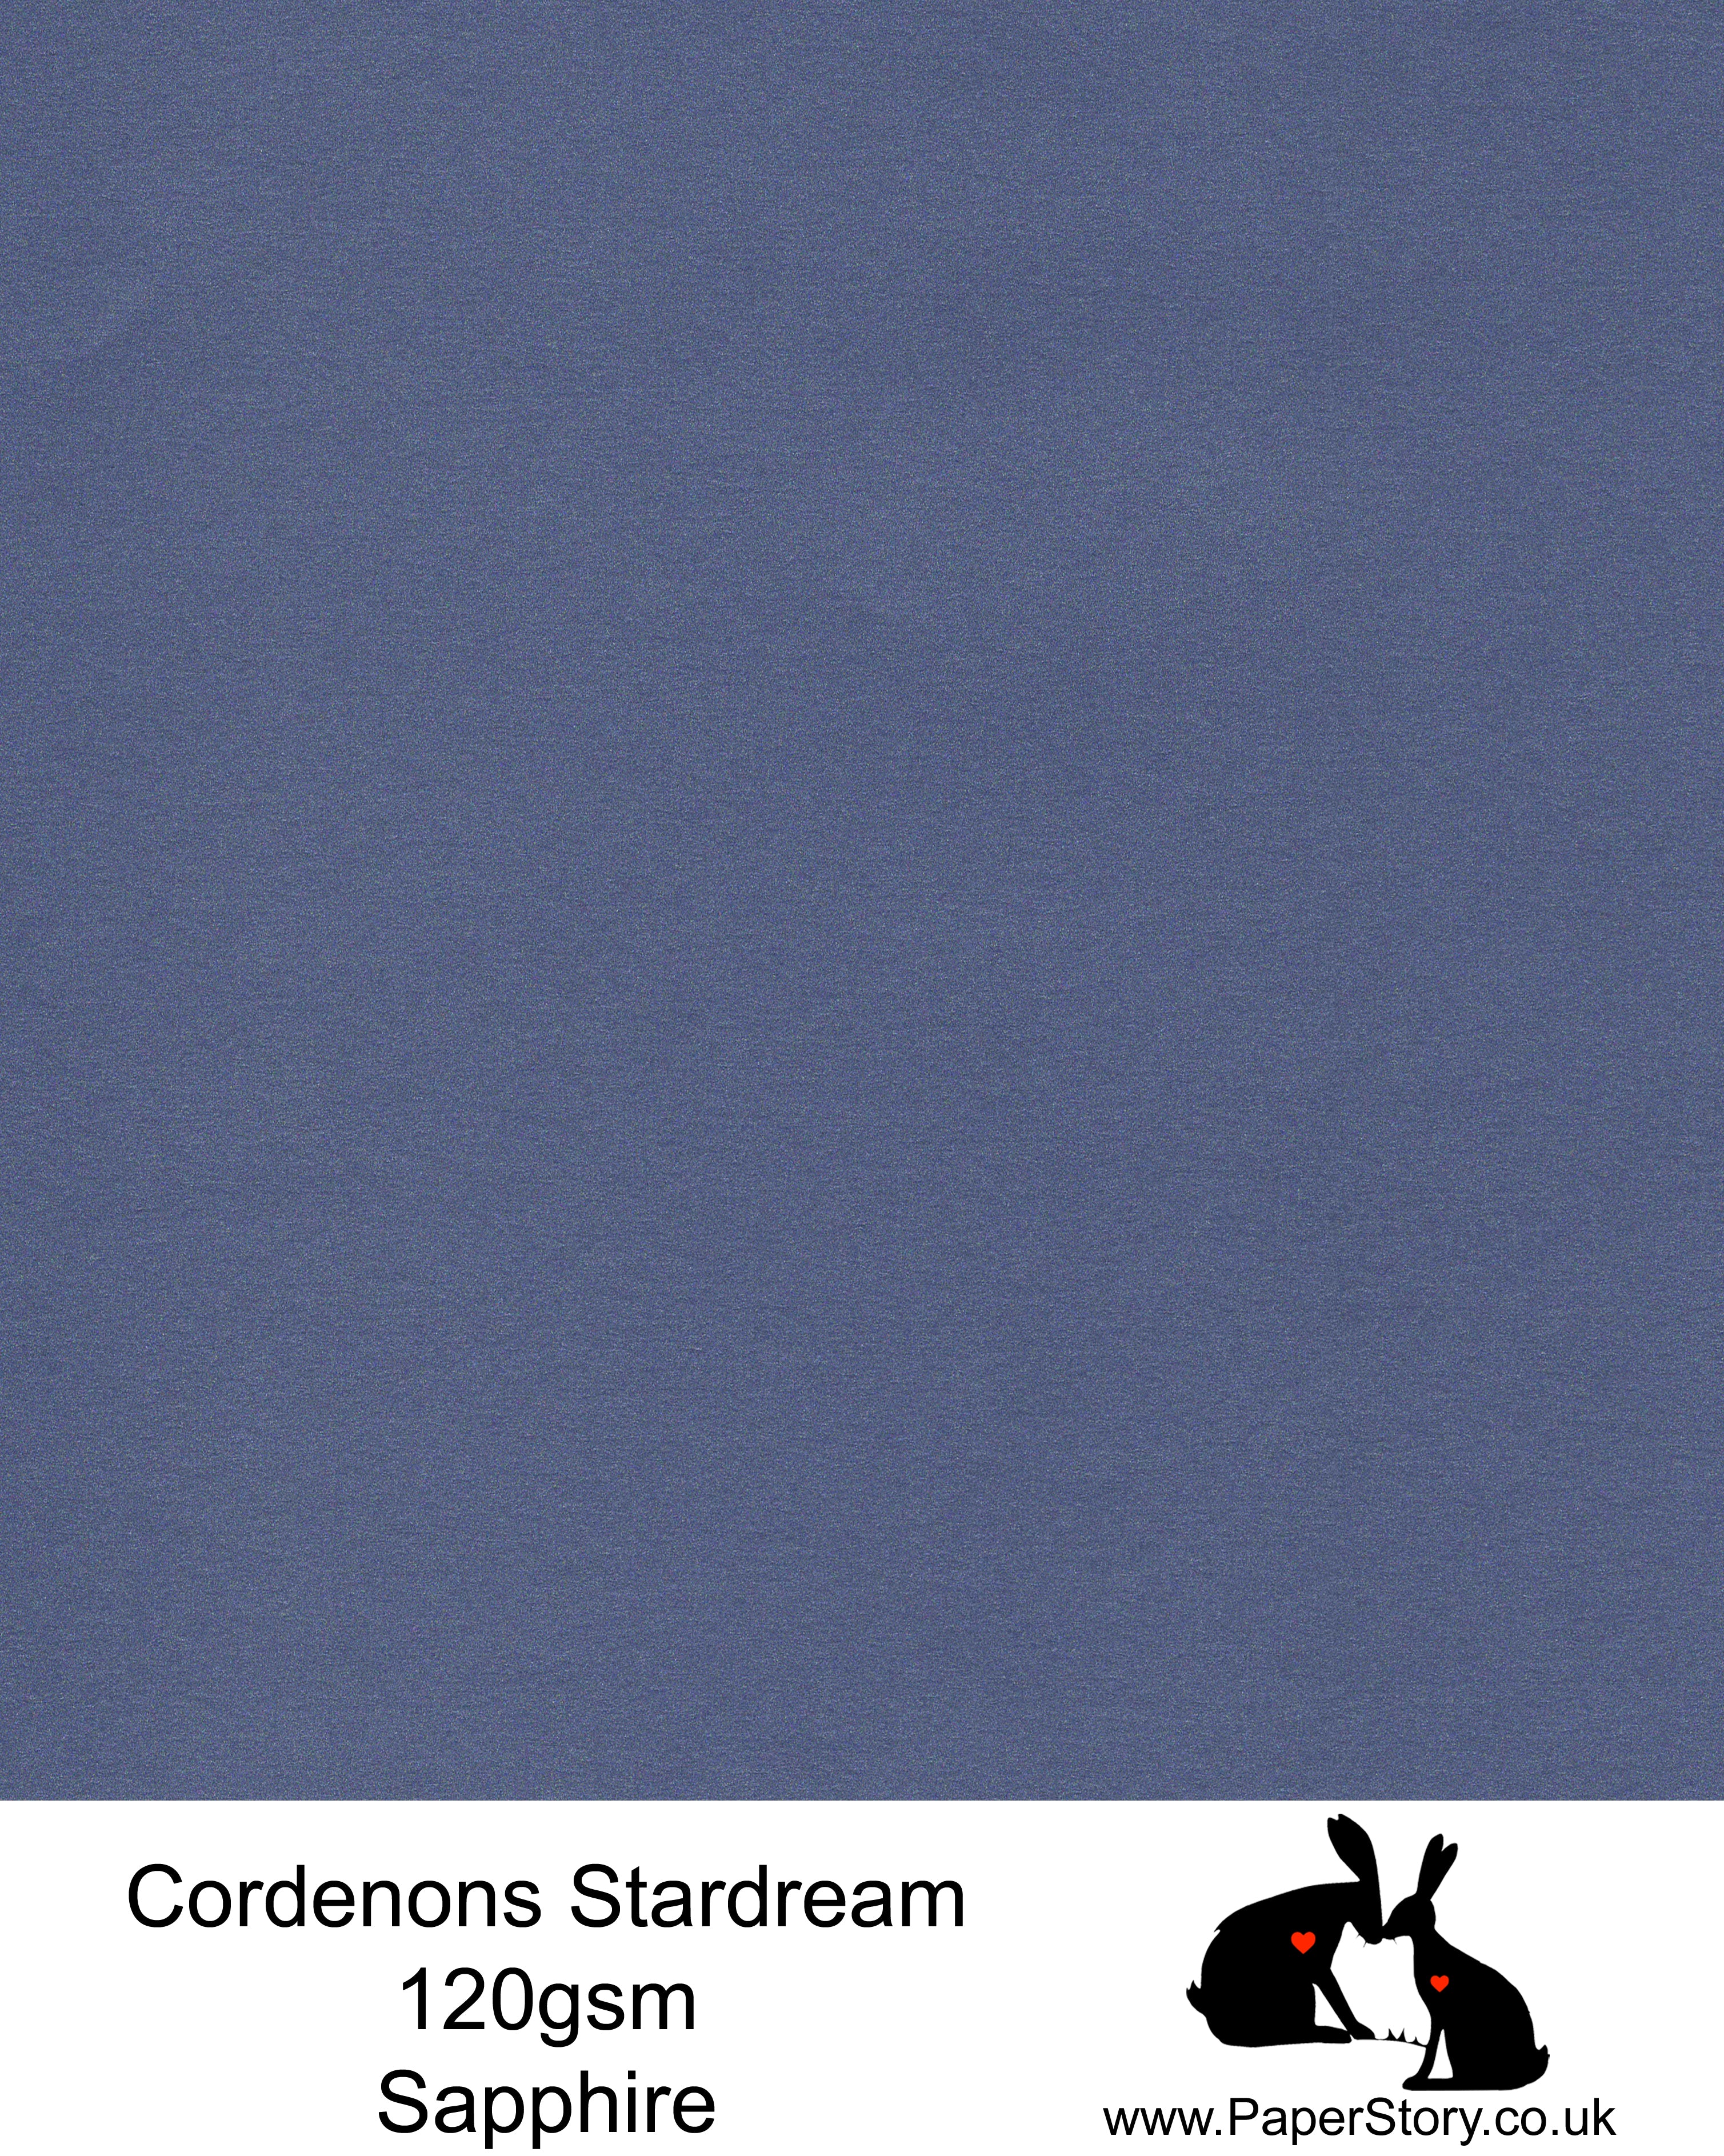 A4 Stardream 120gsm paper for Papercutting, craft, flower making  and wedding stationery. Sapphire deep blue colour.  Stardream is a luxury Italian paper from Italy, it is a double sided quality Pearlescent paper with a matching colour core. FSC Certified, acid free, archival and PH Neutral   